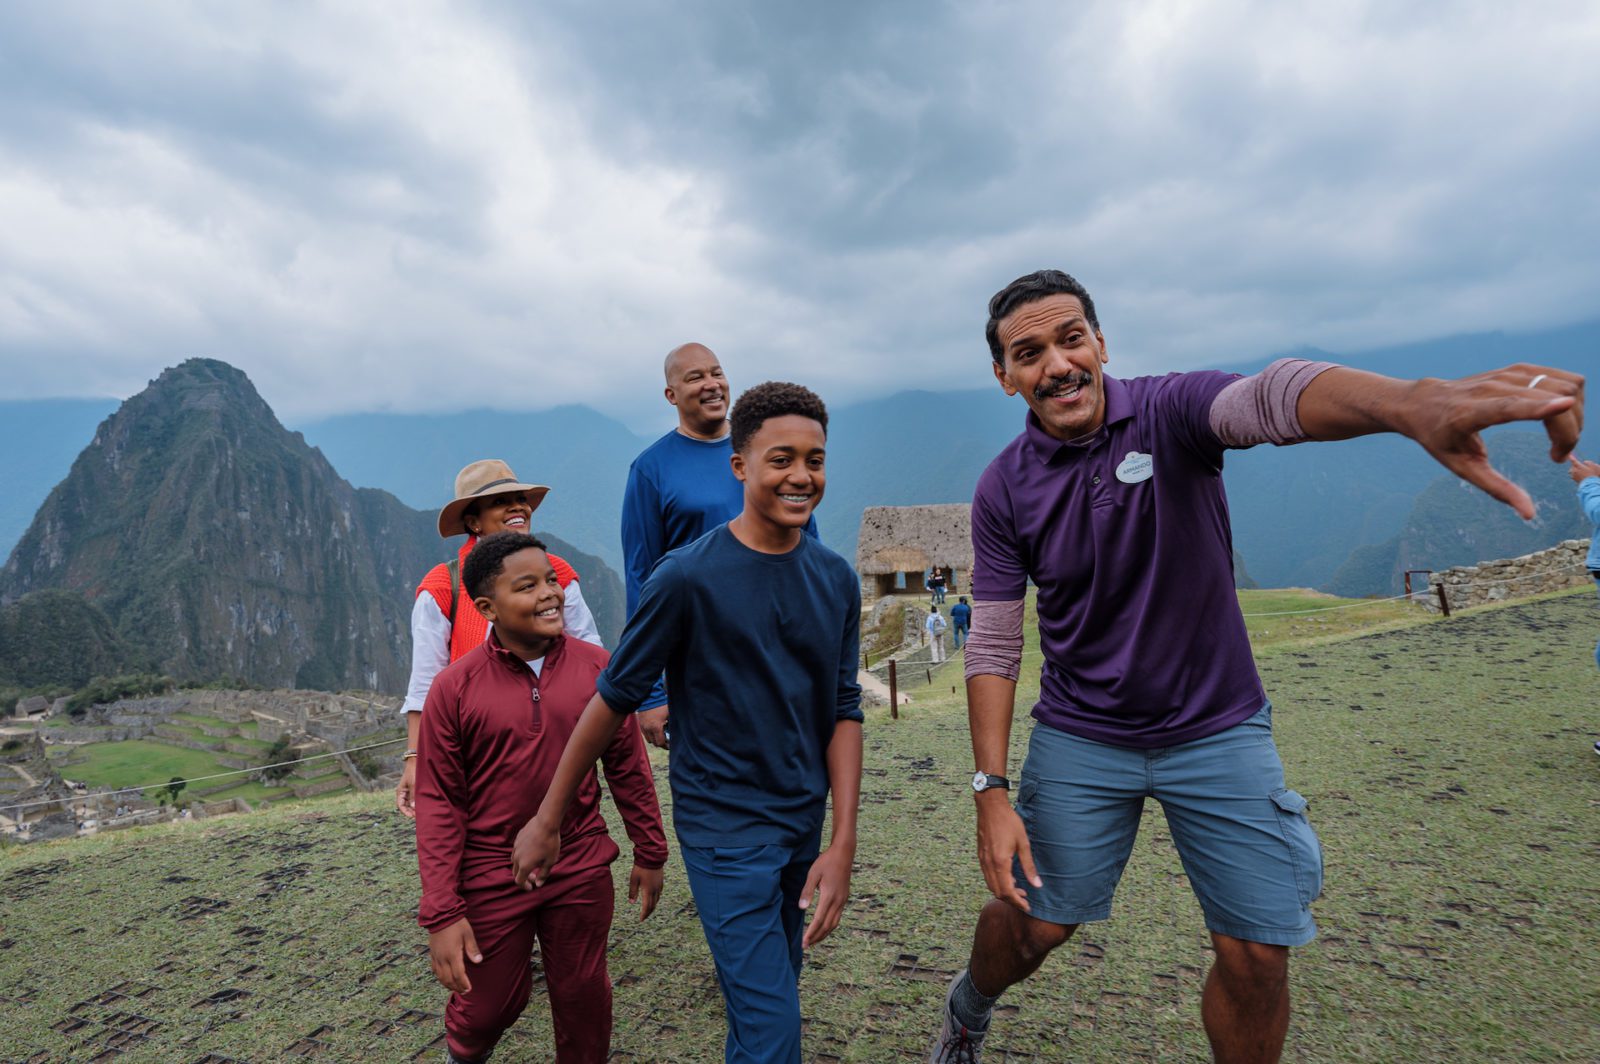 Adventures by Disney adventure guide showing a family the sights of Machu Picchu